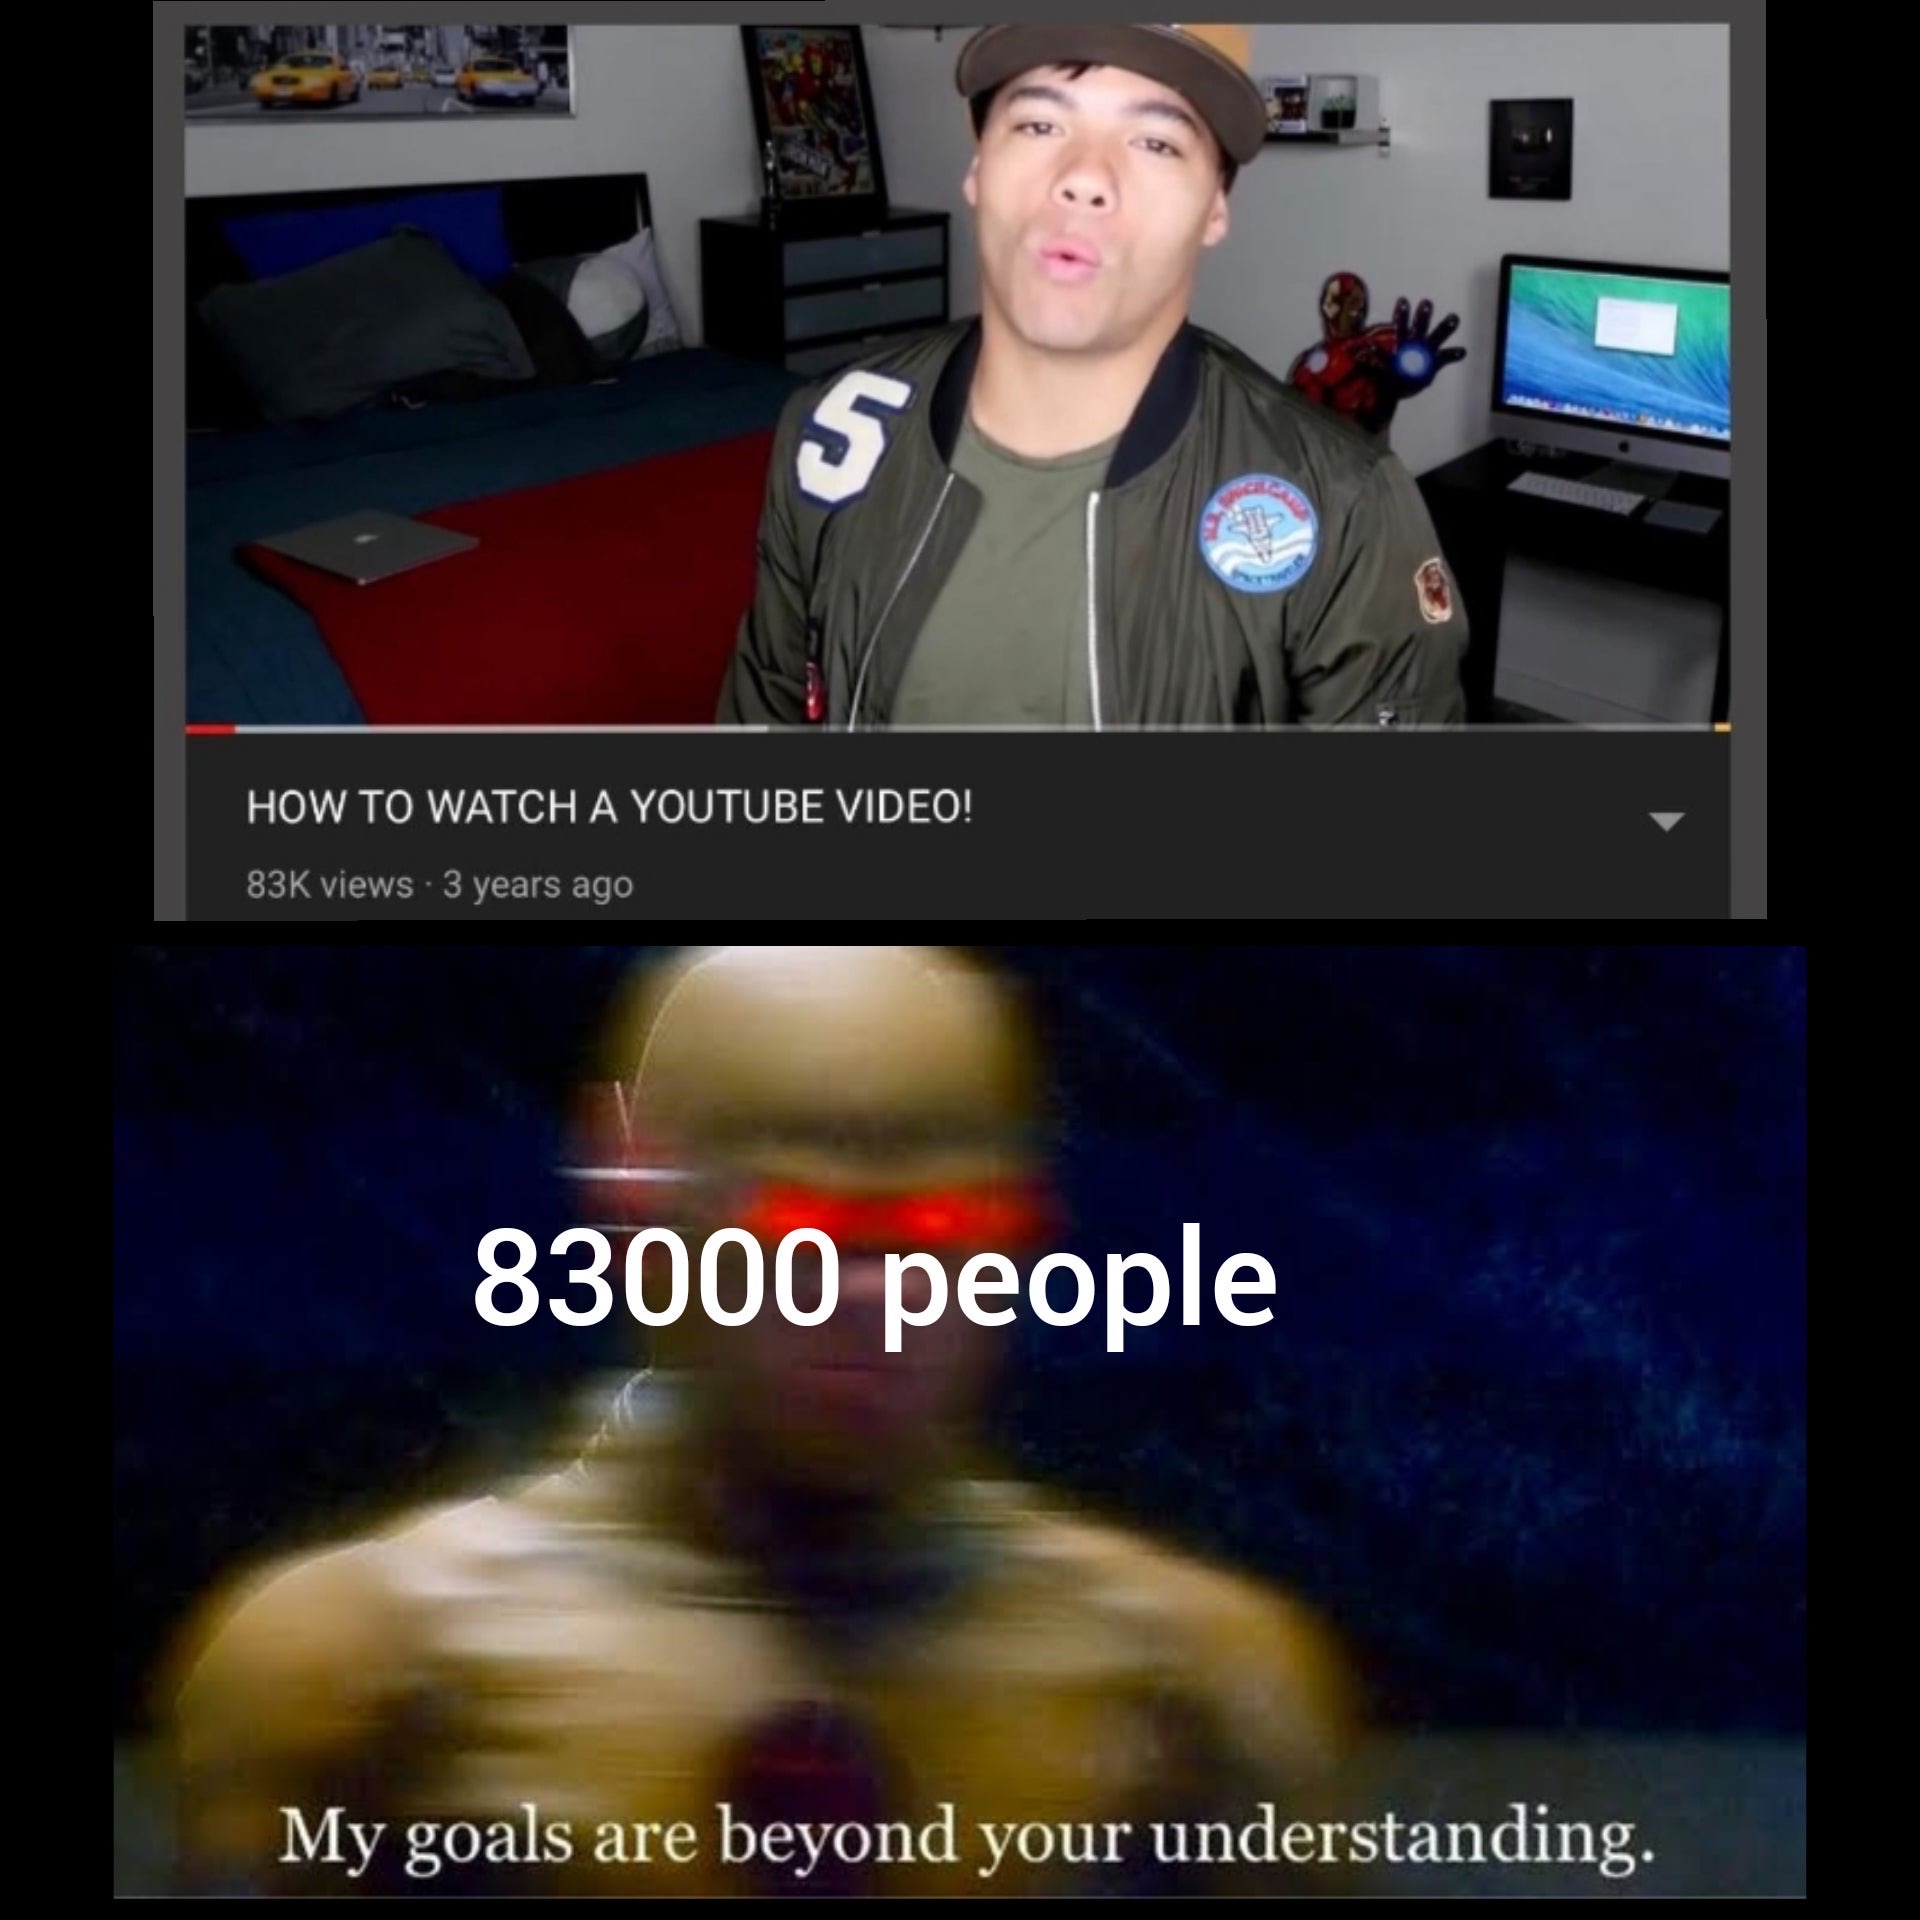 photo caption - How To Watch A Youtube Video! 83K views 3 years ago 83000 people My goals are beyond your understanding.